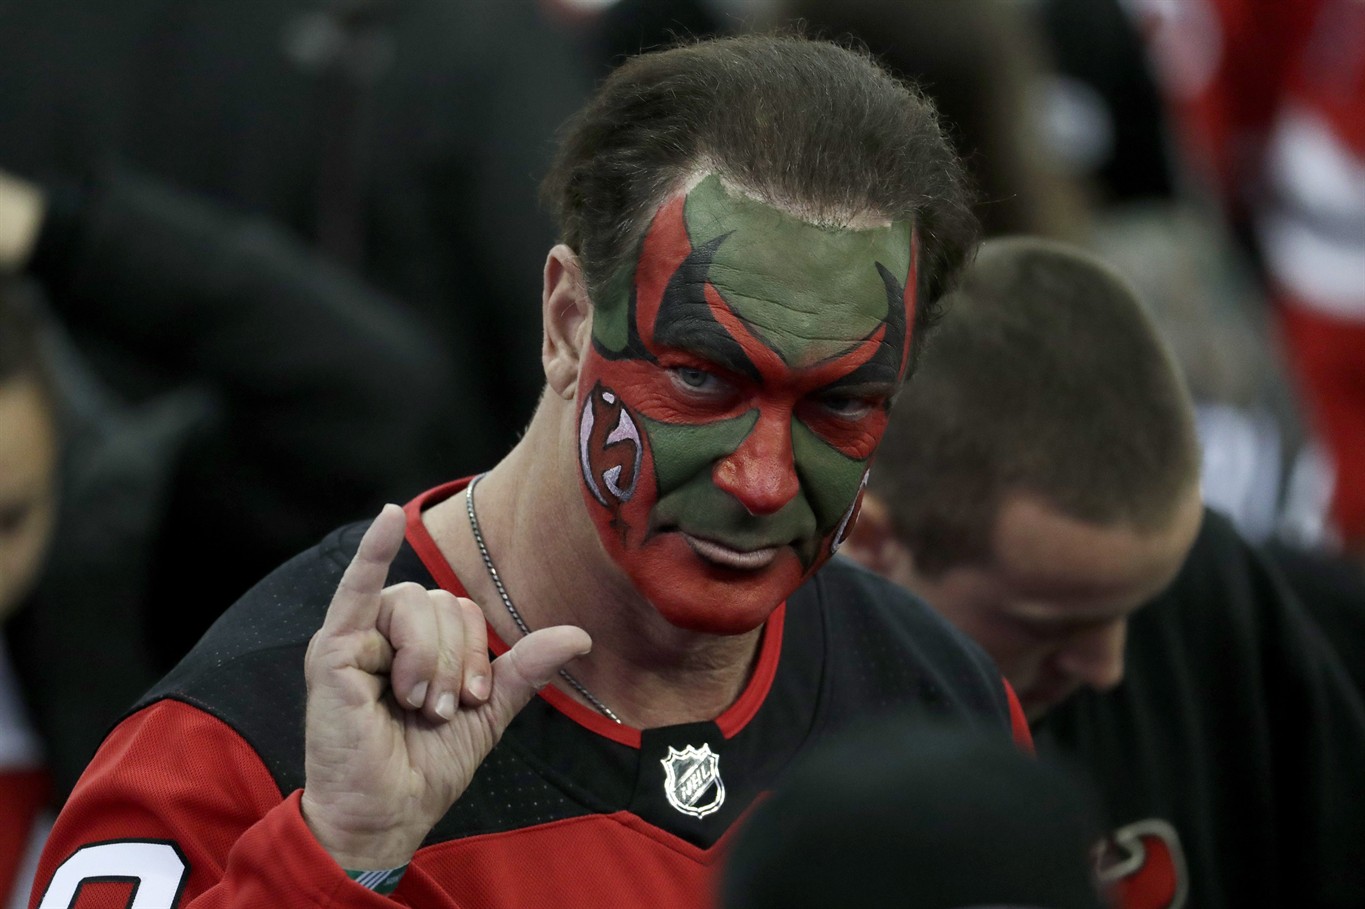 Seinfeld face painter David Puddy shows up at Devils game